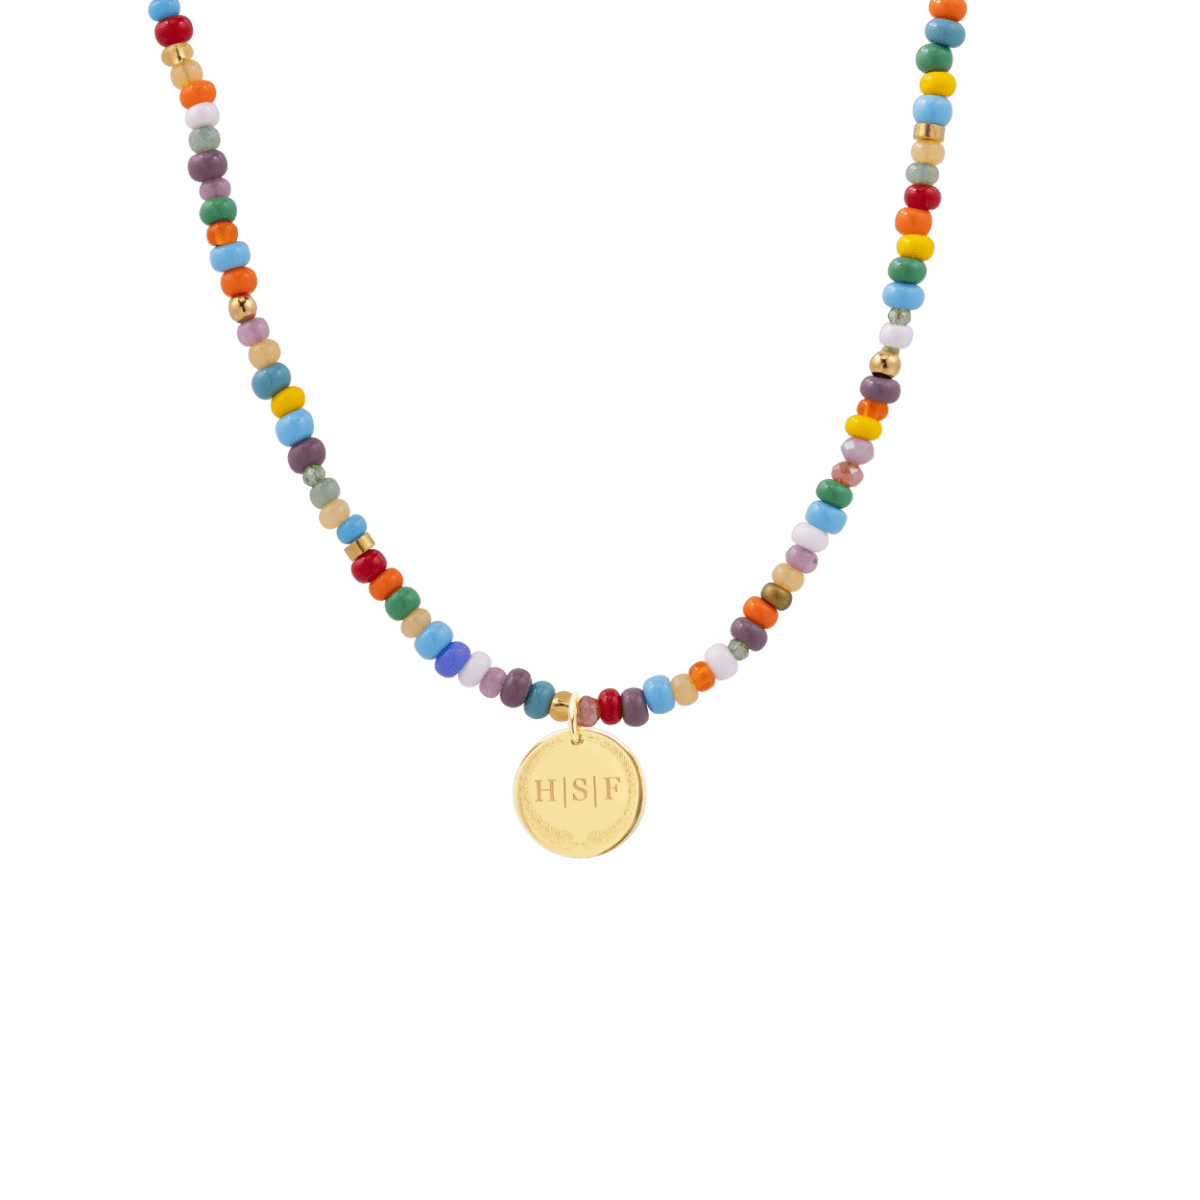 Initial Coin Beads Kette